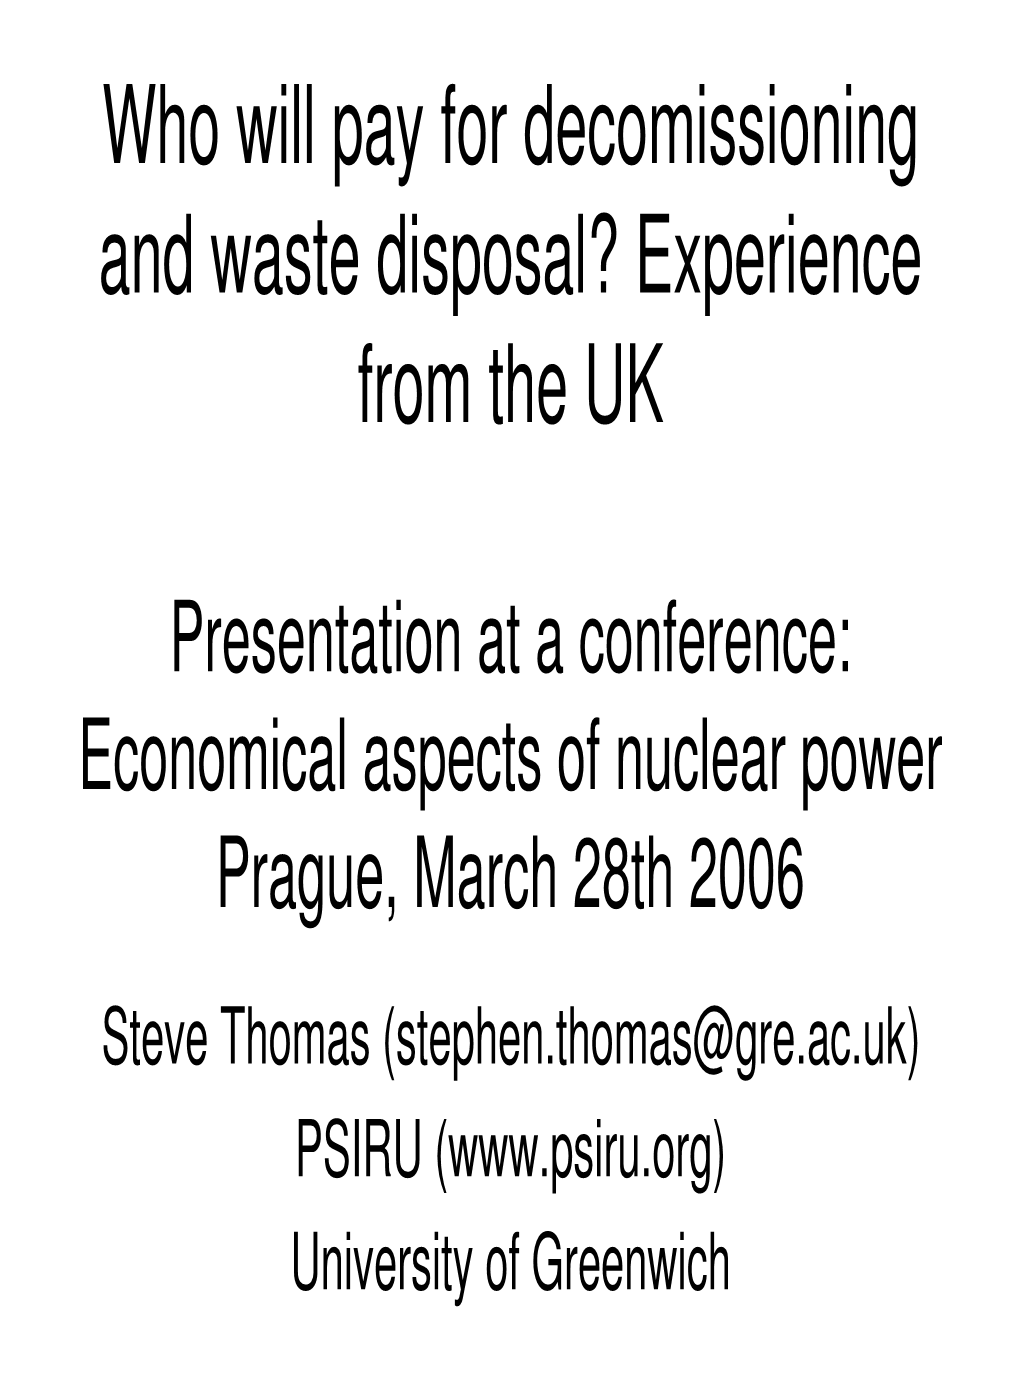 Who Will Pay for Decomissioning and Waste Disposal? Experience from the UK